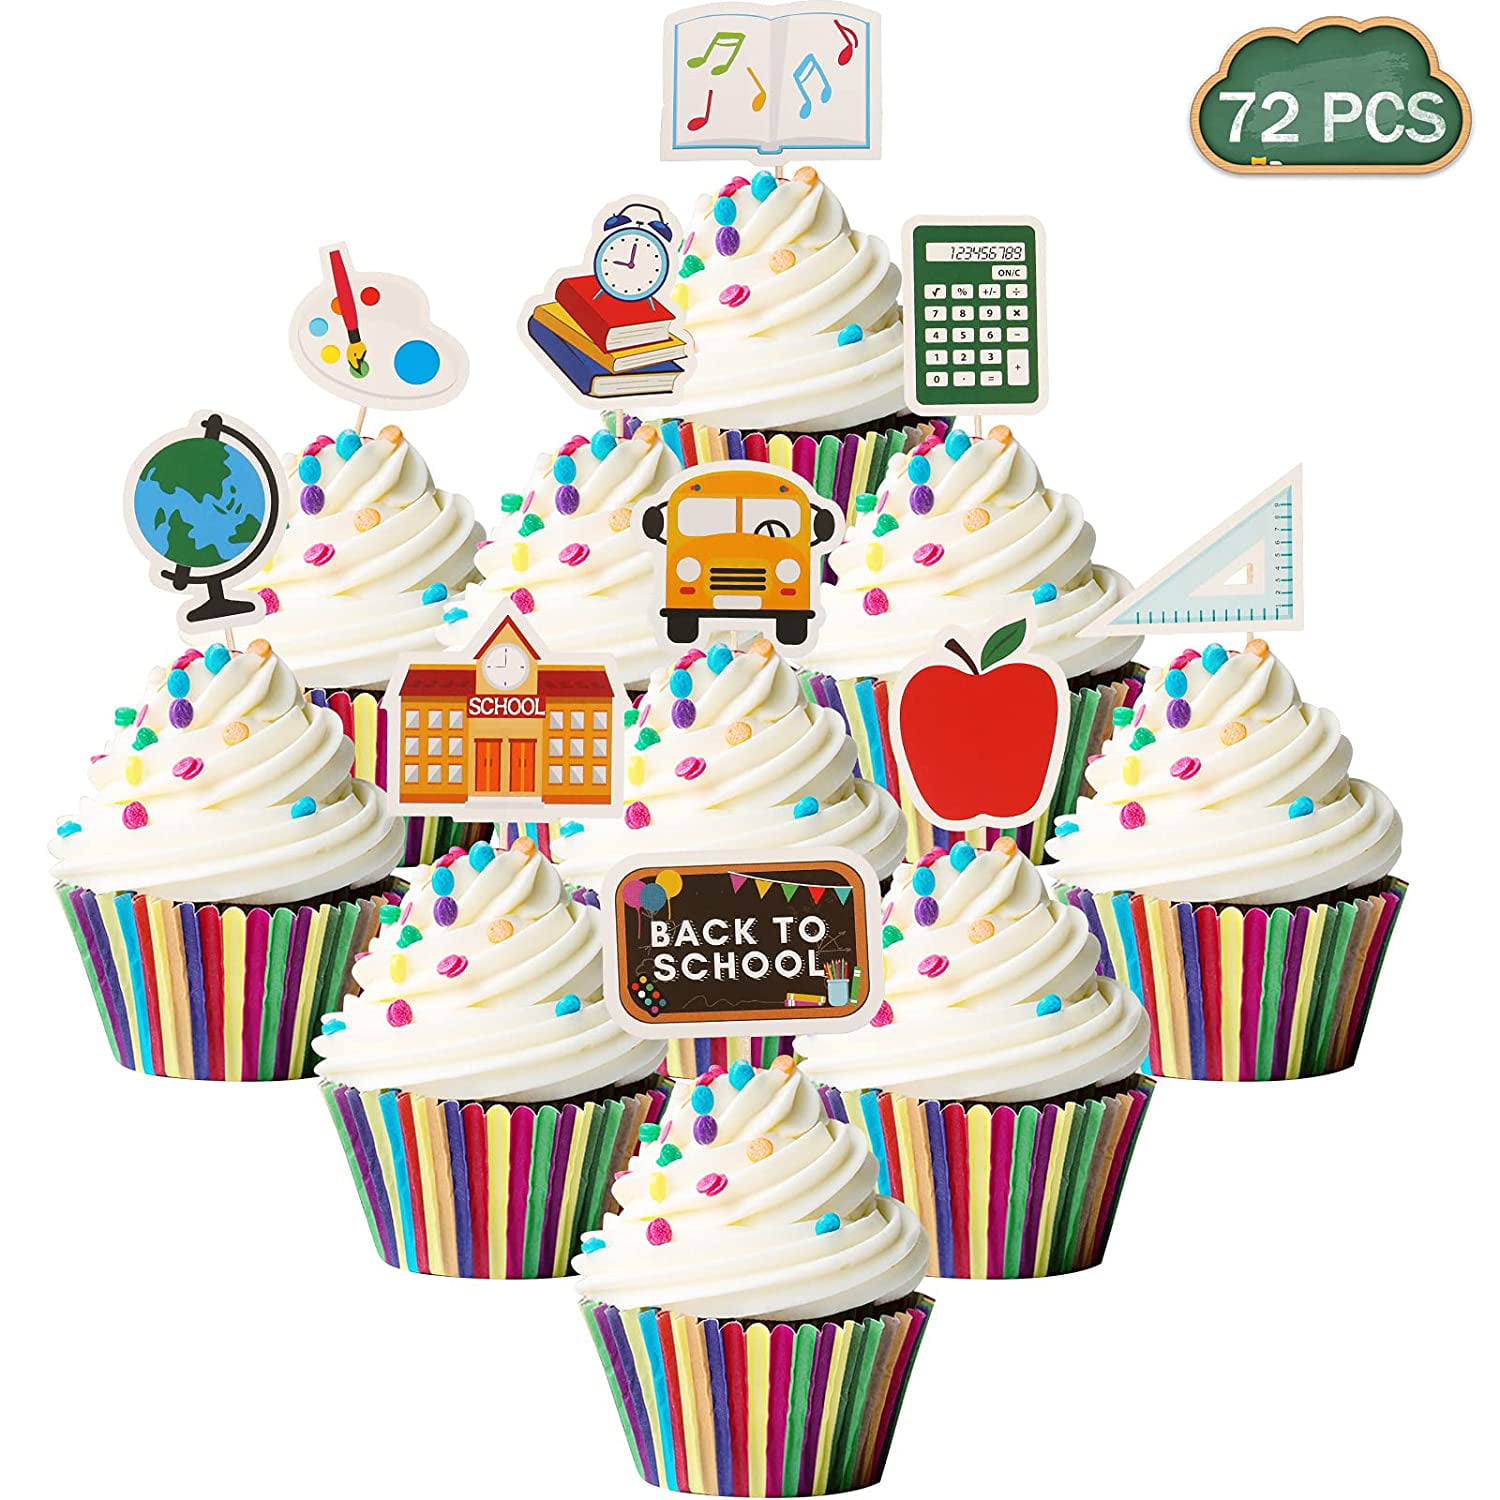 30 Pcs Back to School Welcome Class Cupcake Toppers for First Day of School Welcome Party Decoration School Activities Teacher Gift Classroom Decor 